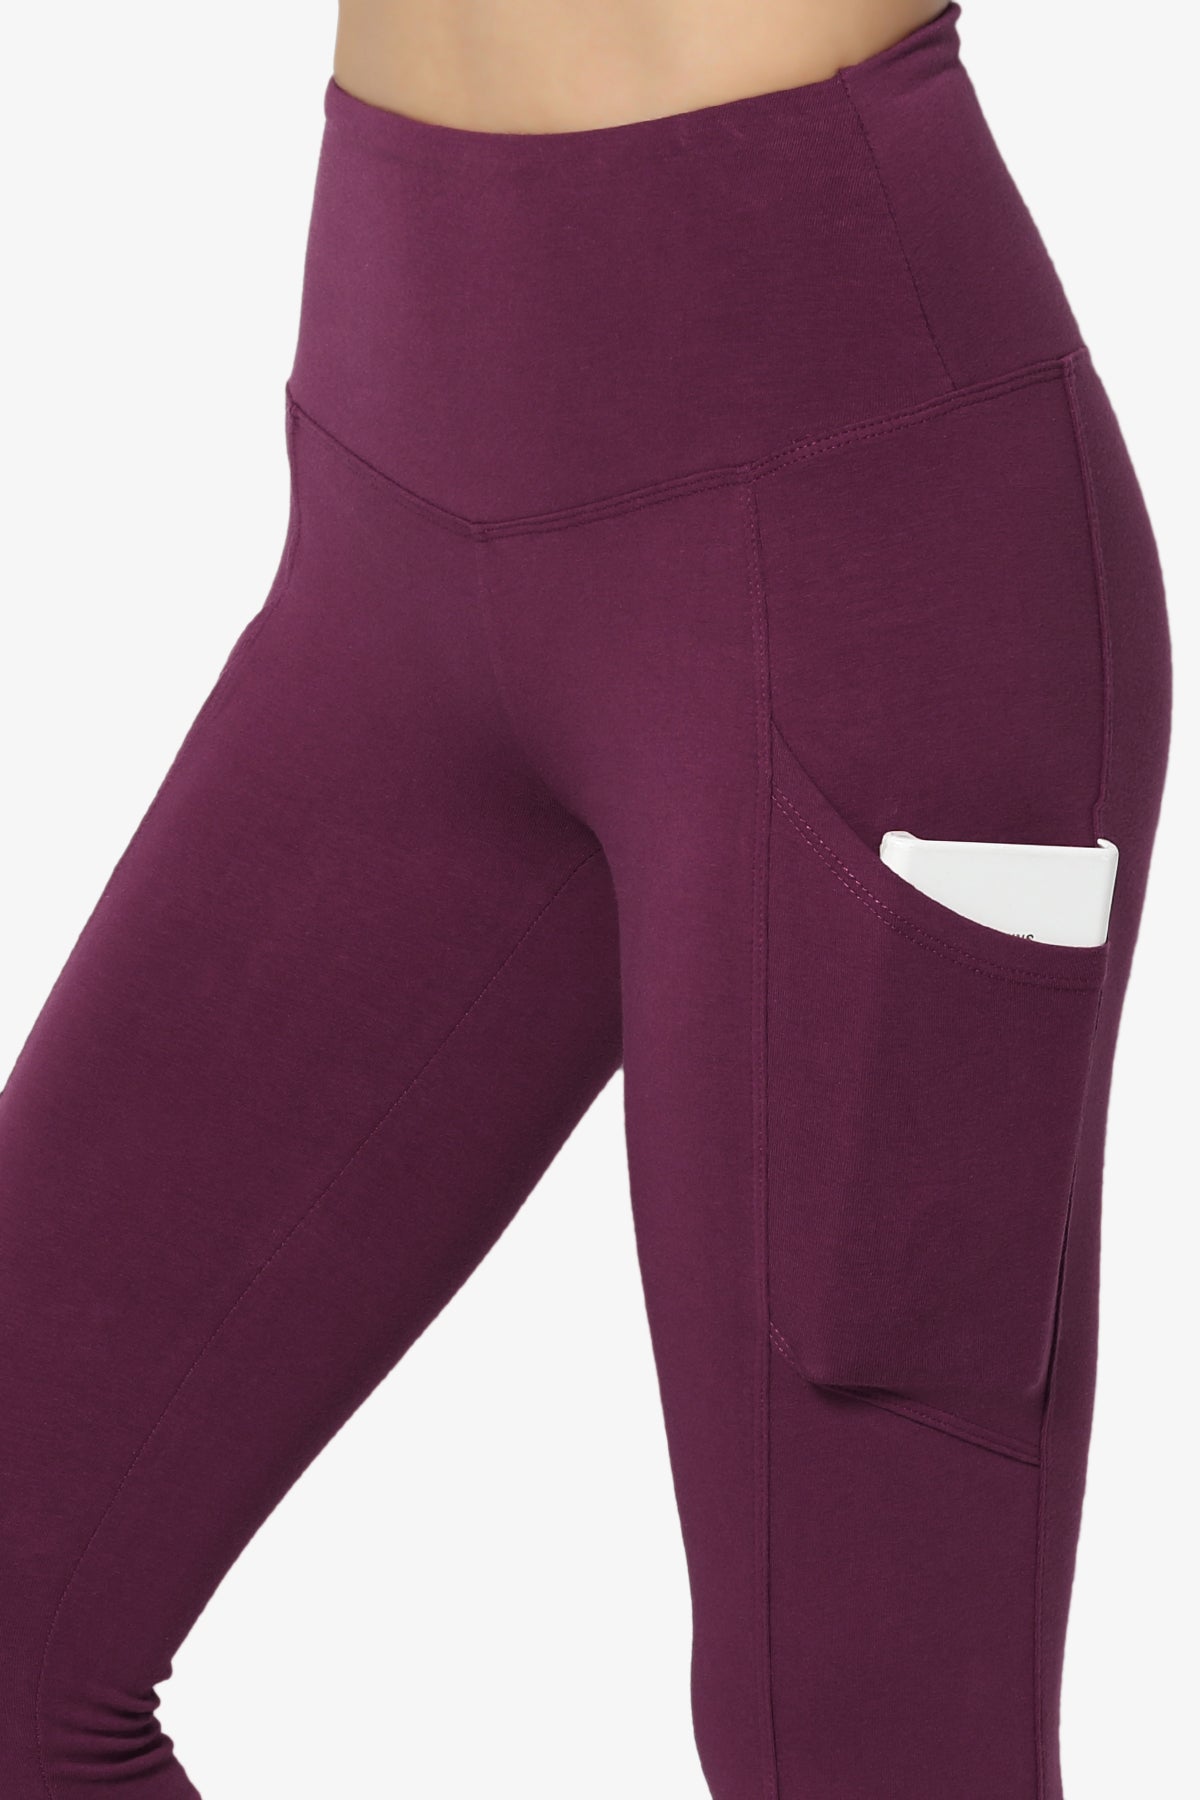 Ansley Luxe Cotton Leggings with Pockets DARK PLUM_5